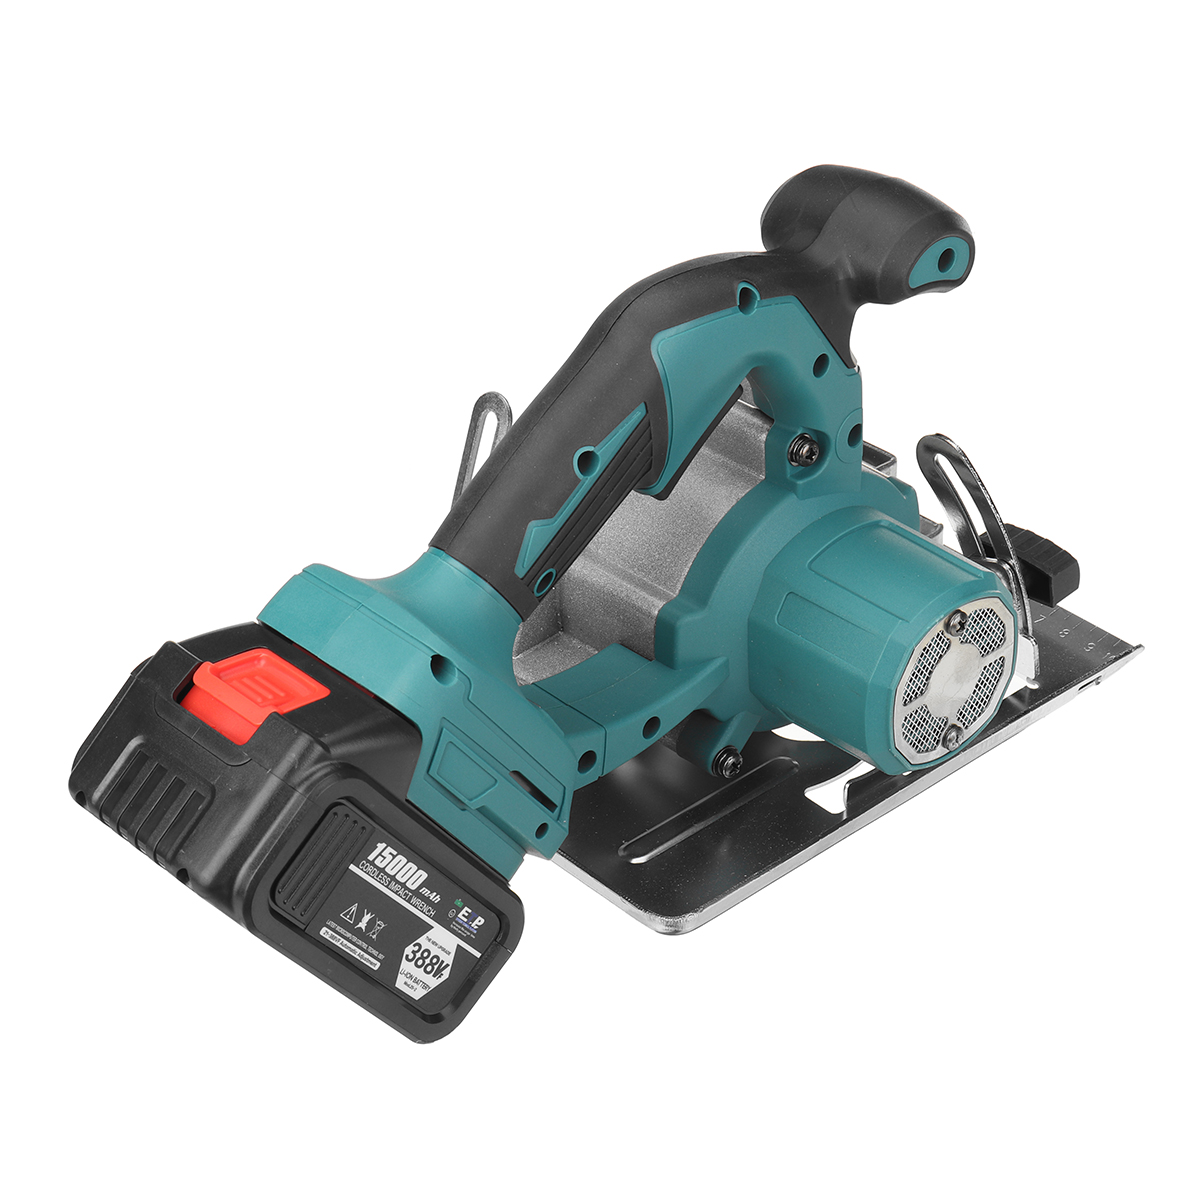 388VF-Electric-Circular-Saw-Woodworking-Wood-Wood-Cutter-W-None12-Battery-For-Makita-1859077-11